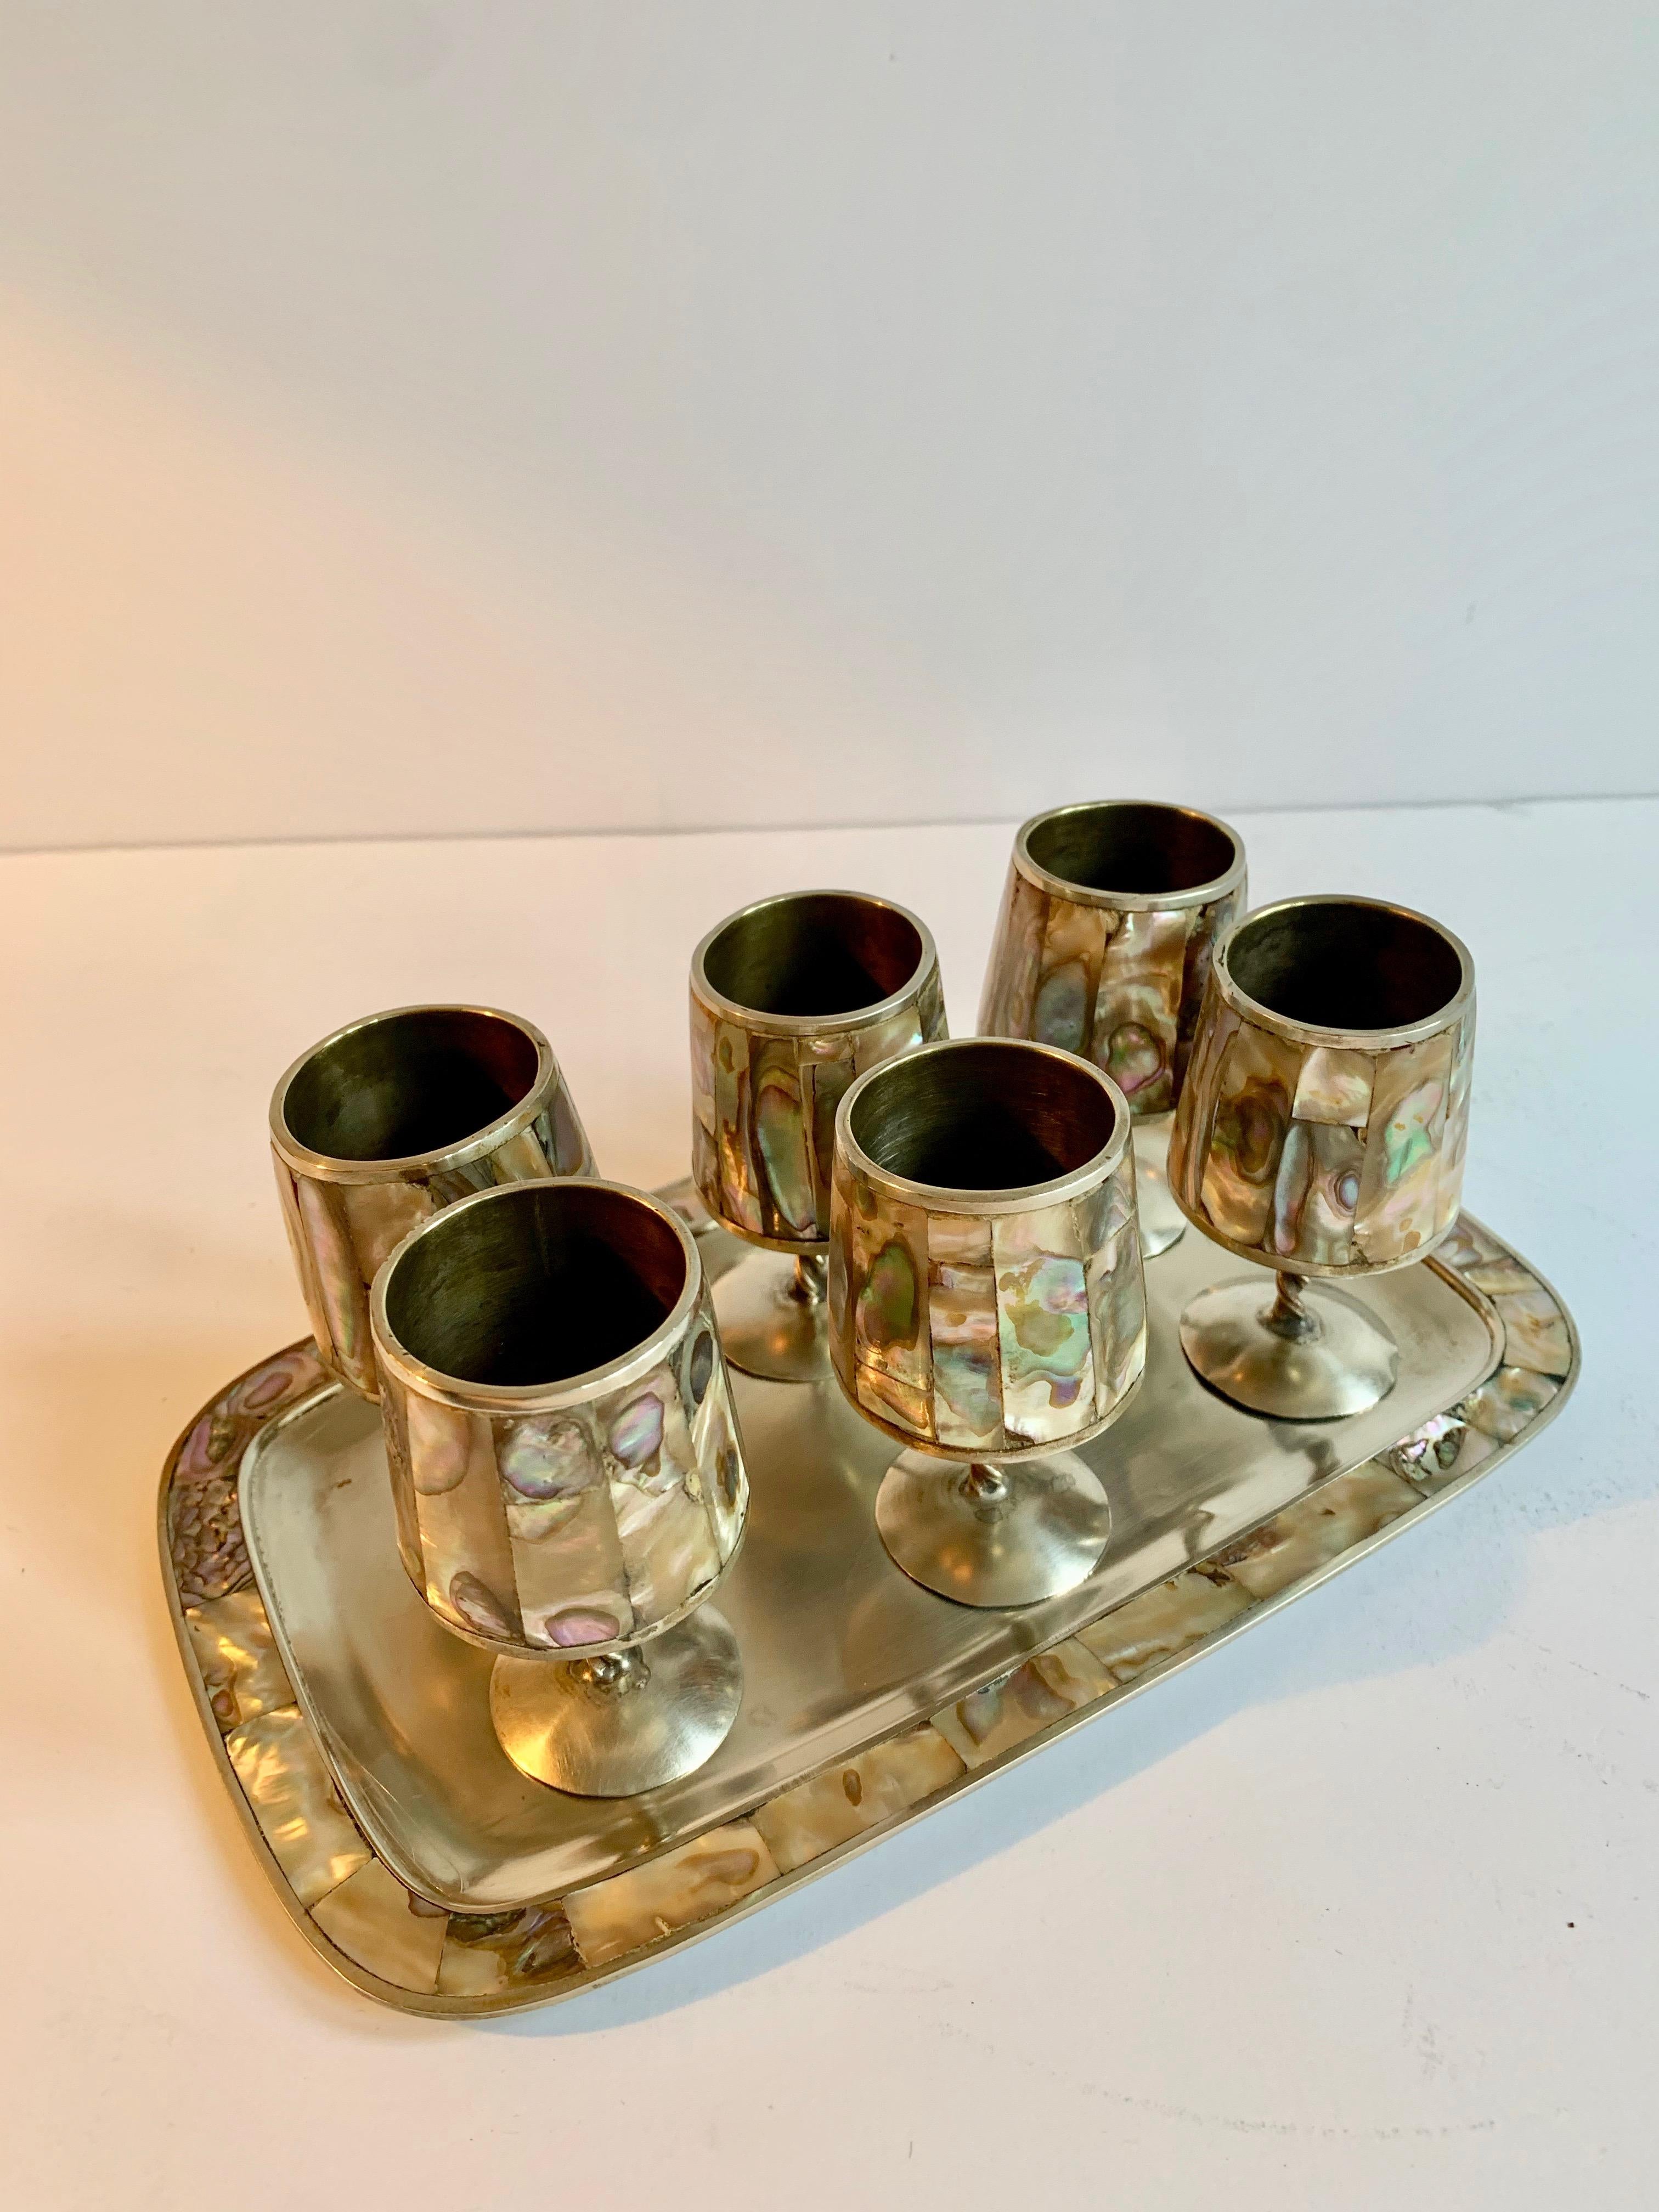 A handsome 7 piece set of Mexican Alpaca Silver Mexico. 6 Cordials and a tray... All in good condition with no missing pieces.

Leave the traditional and use the set for cocktails, mocktails or a petite liqueur Dessert... a wonderful gift, holiday